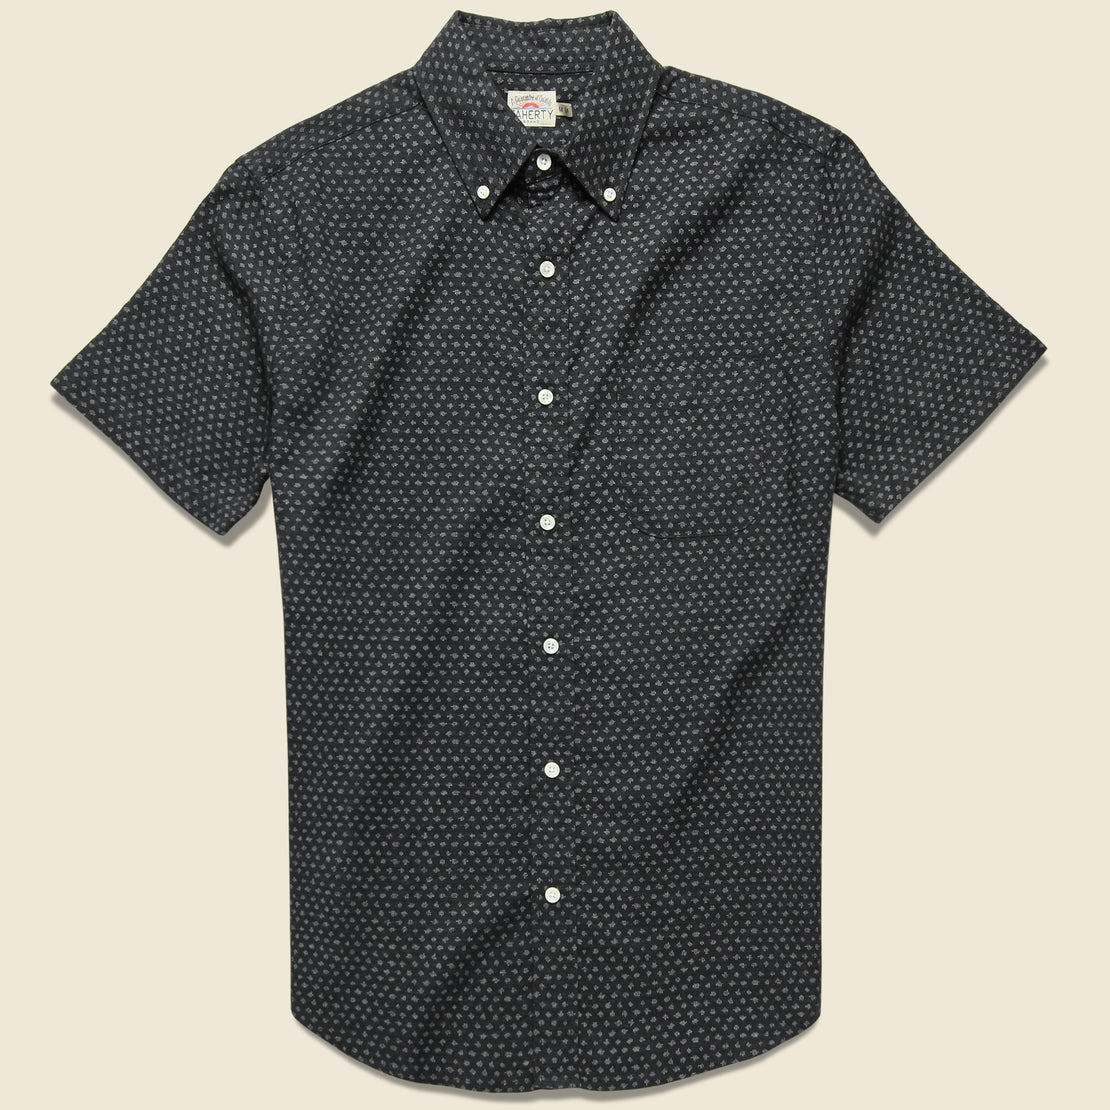 Faherty Faherty - S/S Pacific Shirt, SS19